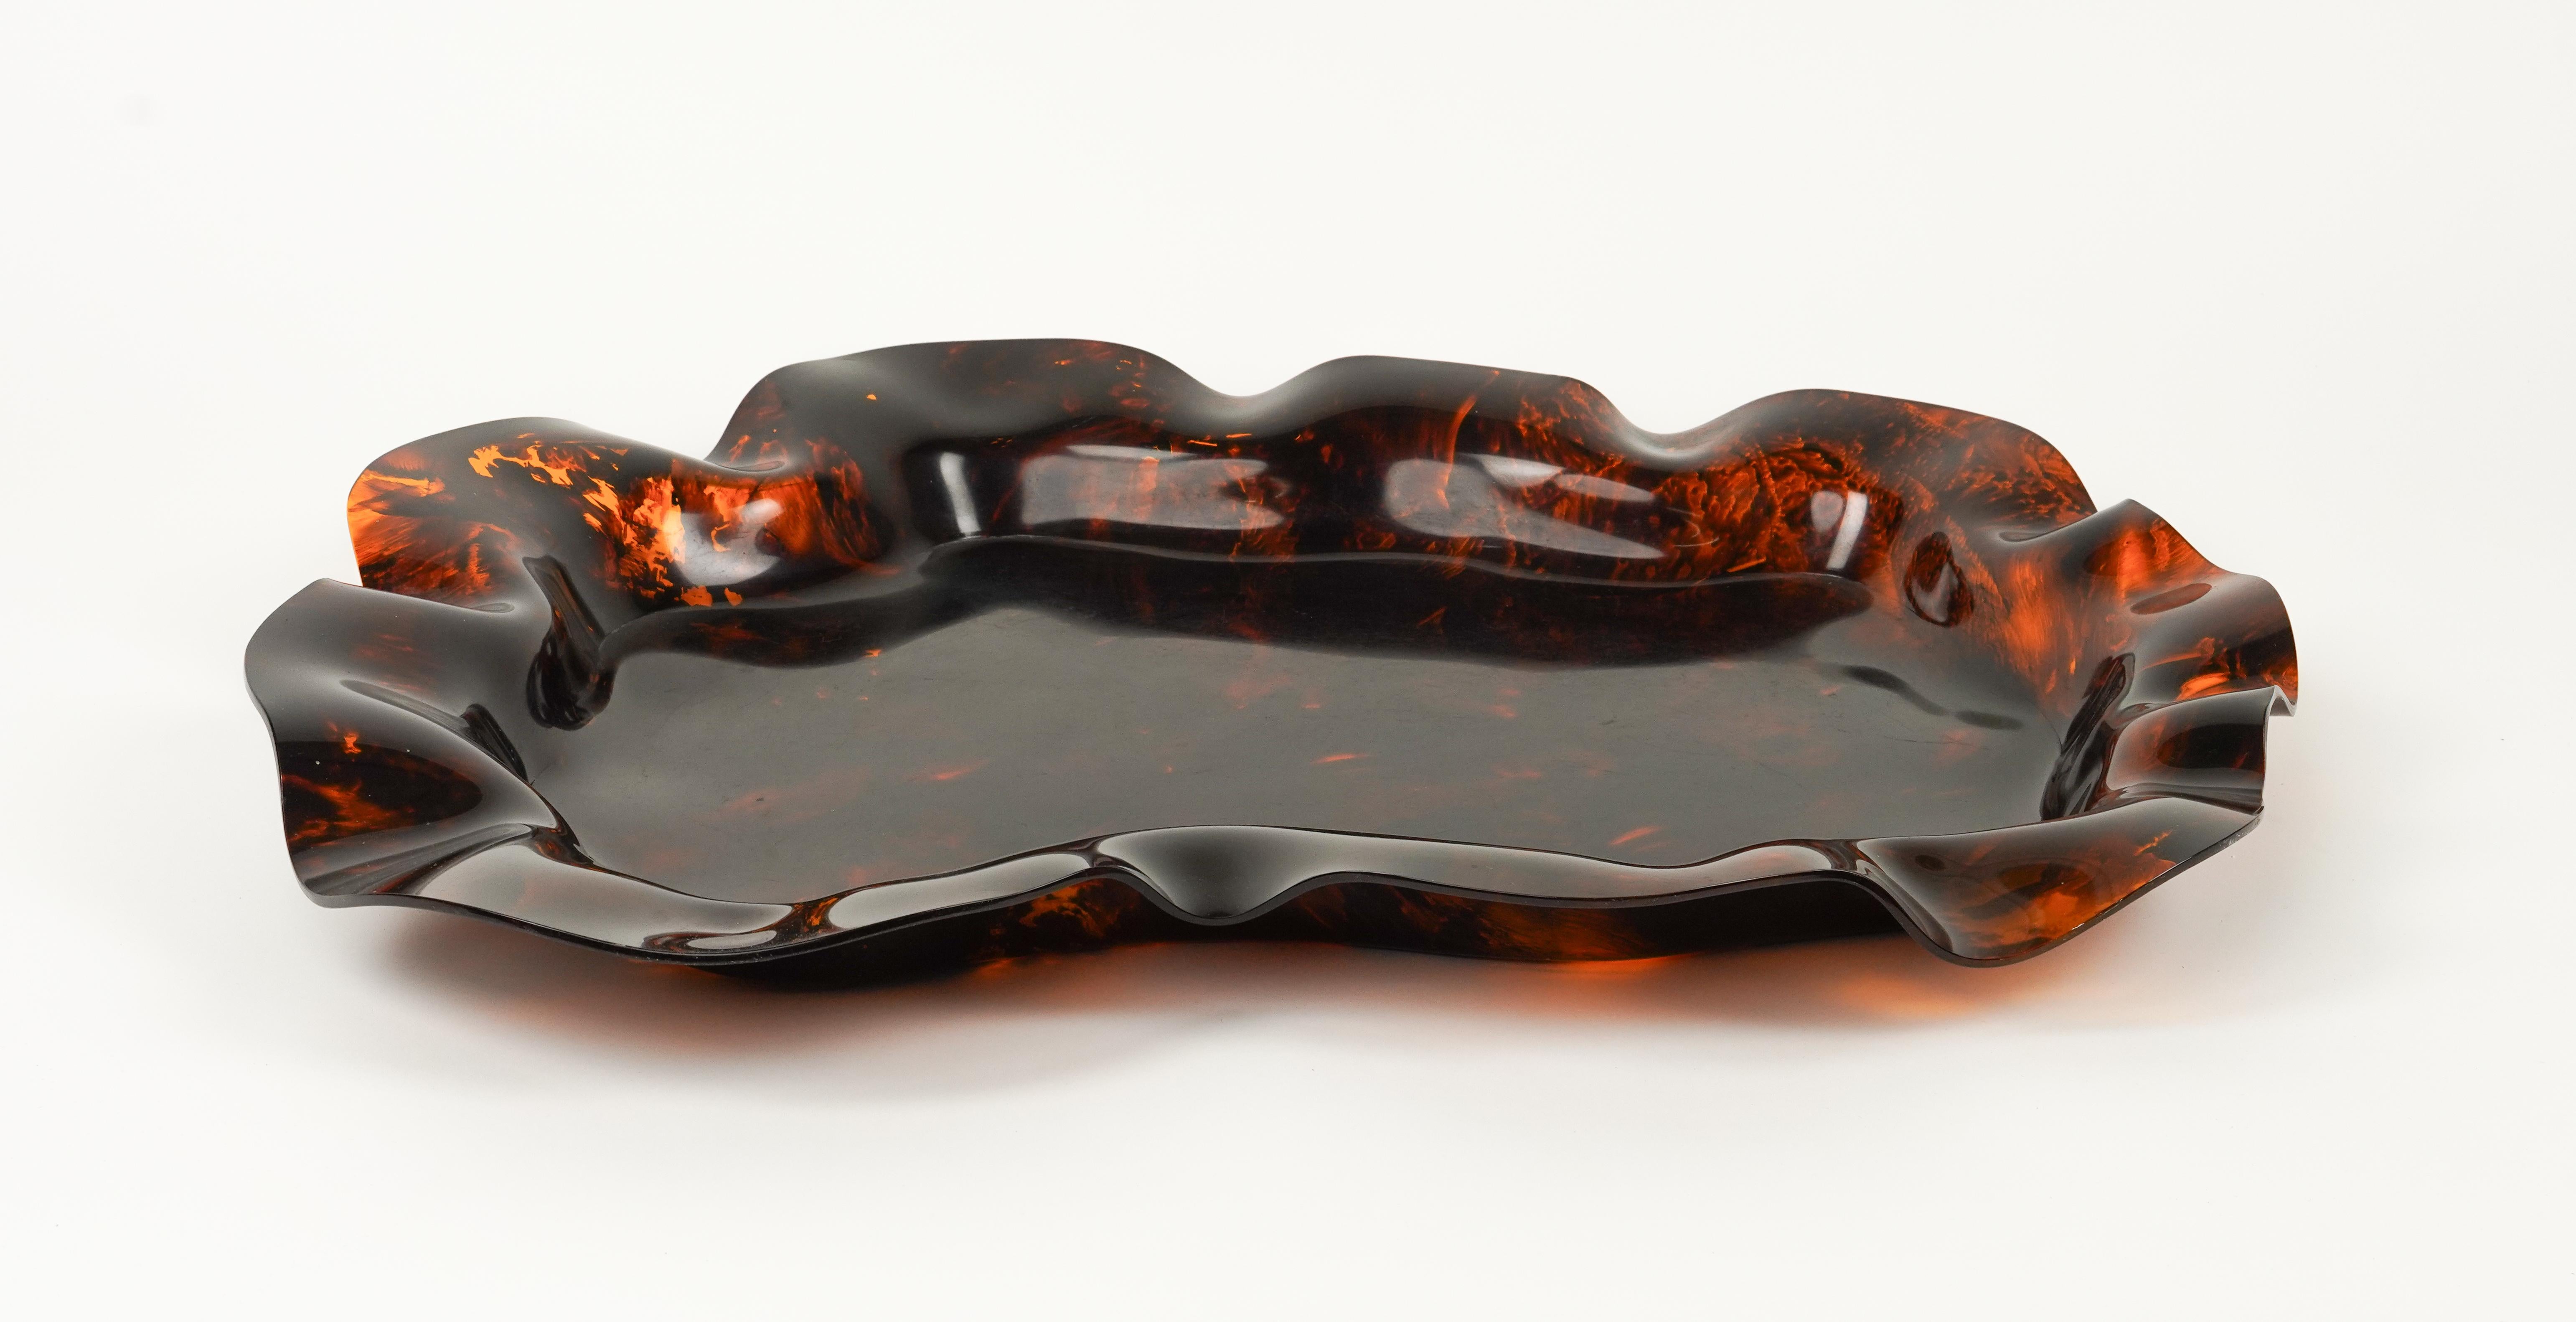 Large Serving Tray or Centerpiece Lucite Faux Tortoiseshell, Italy 1970s For Sale 8